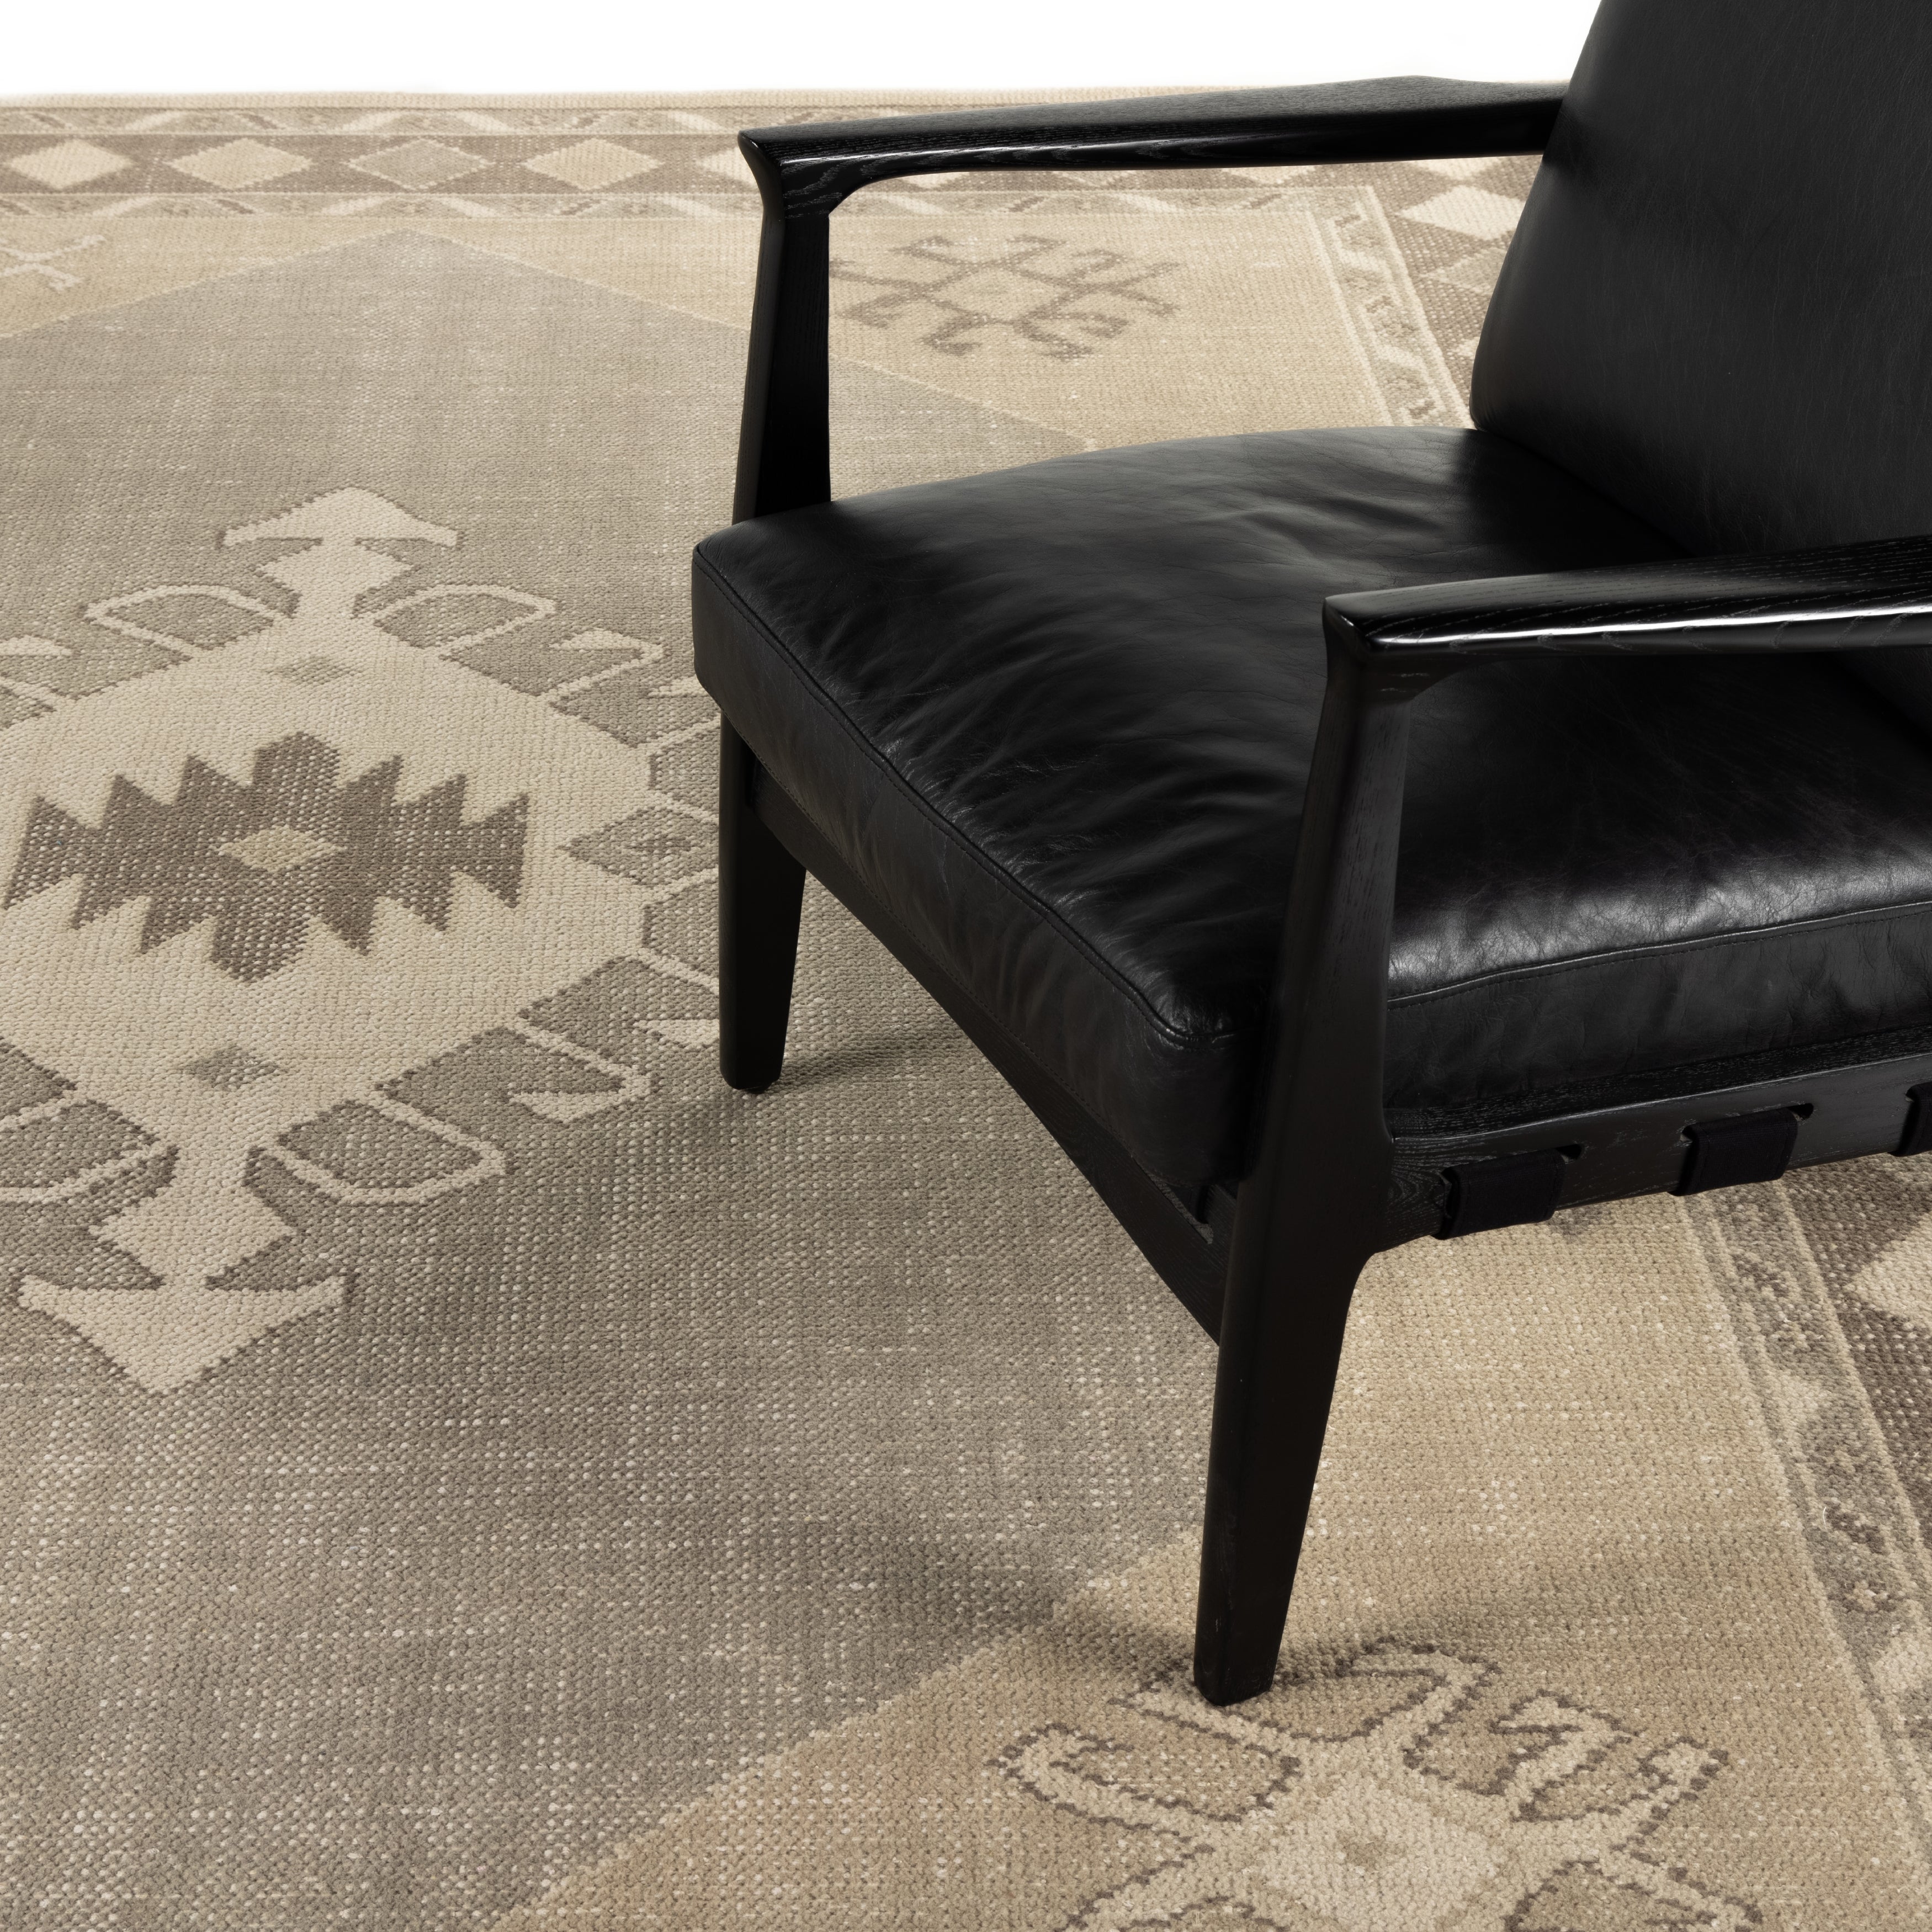 The Samsa Rug is made from a beautiful blend of classic cotton and luxurious New Zealand wool, with unique, intricate motifs that seem to speak a story all their own. Amethyst Home provides interior design services, furniture, rugs, and lighting in the Omaha metro area.